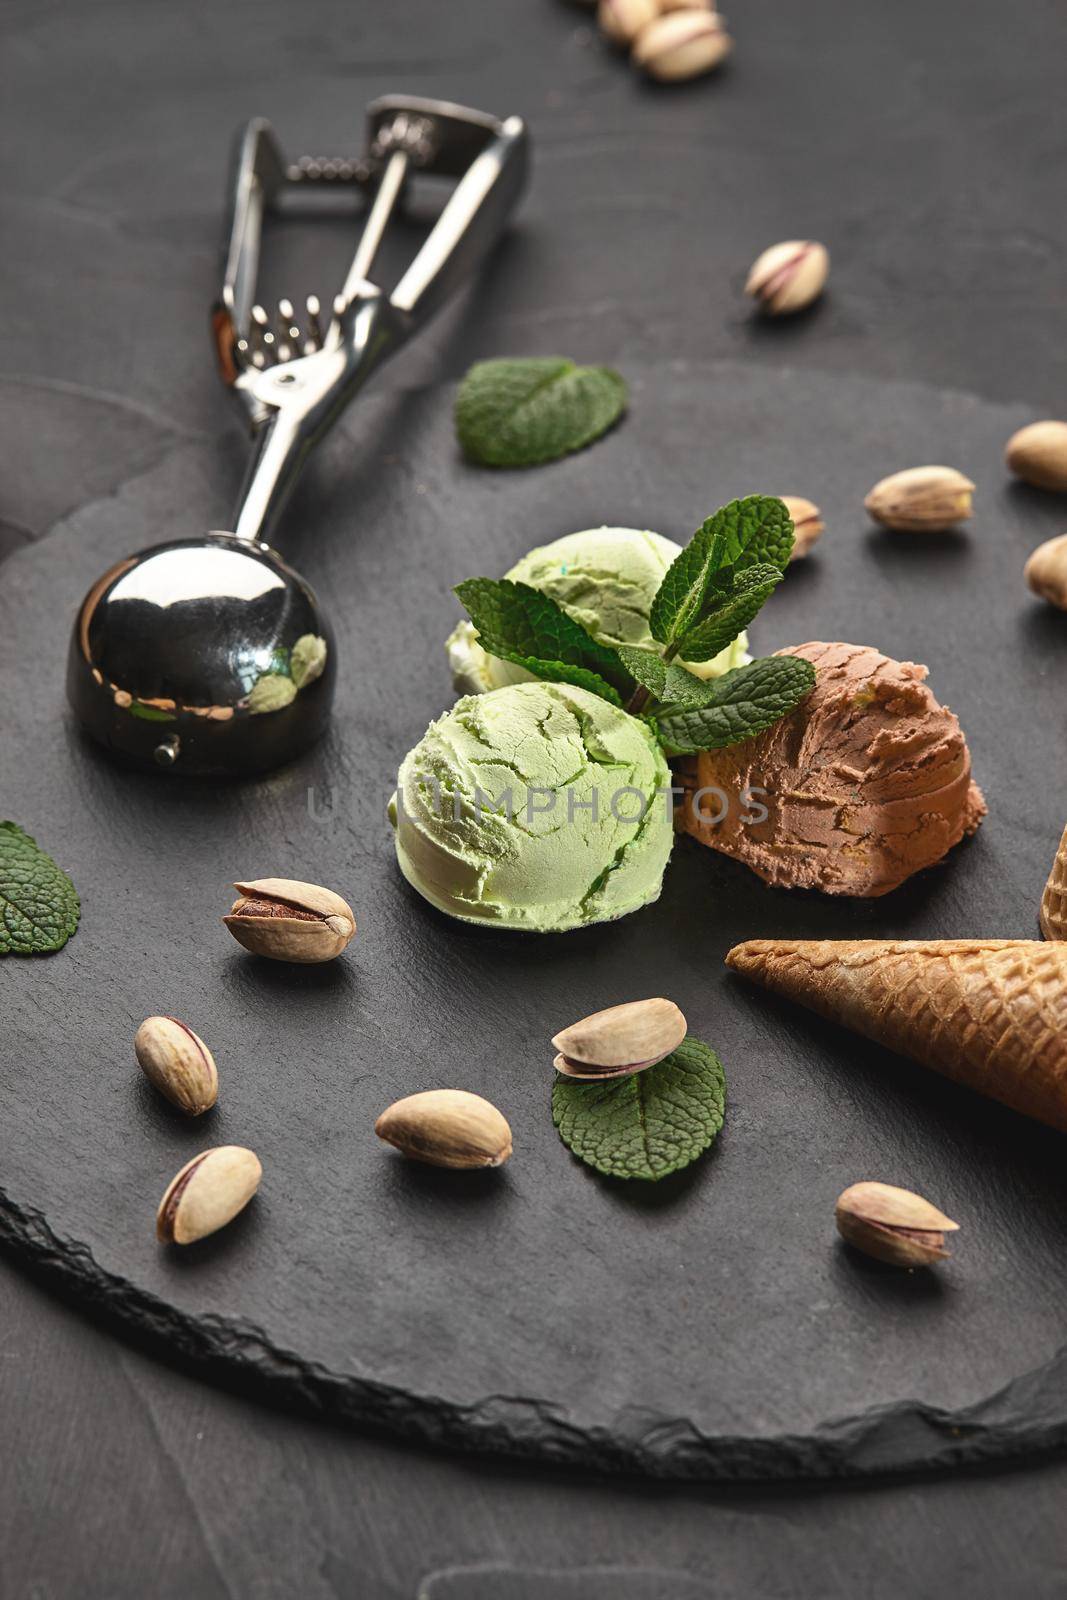 Gourmet chocolate and pistachio ice cream served on a stone slate over a black background. by nazarovsergey